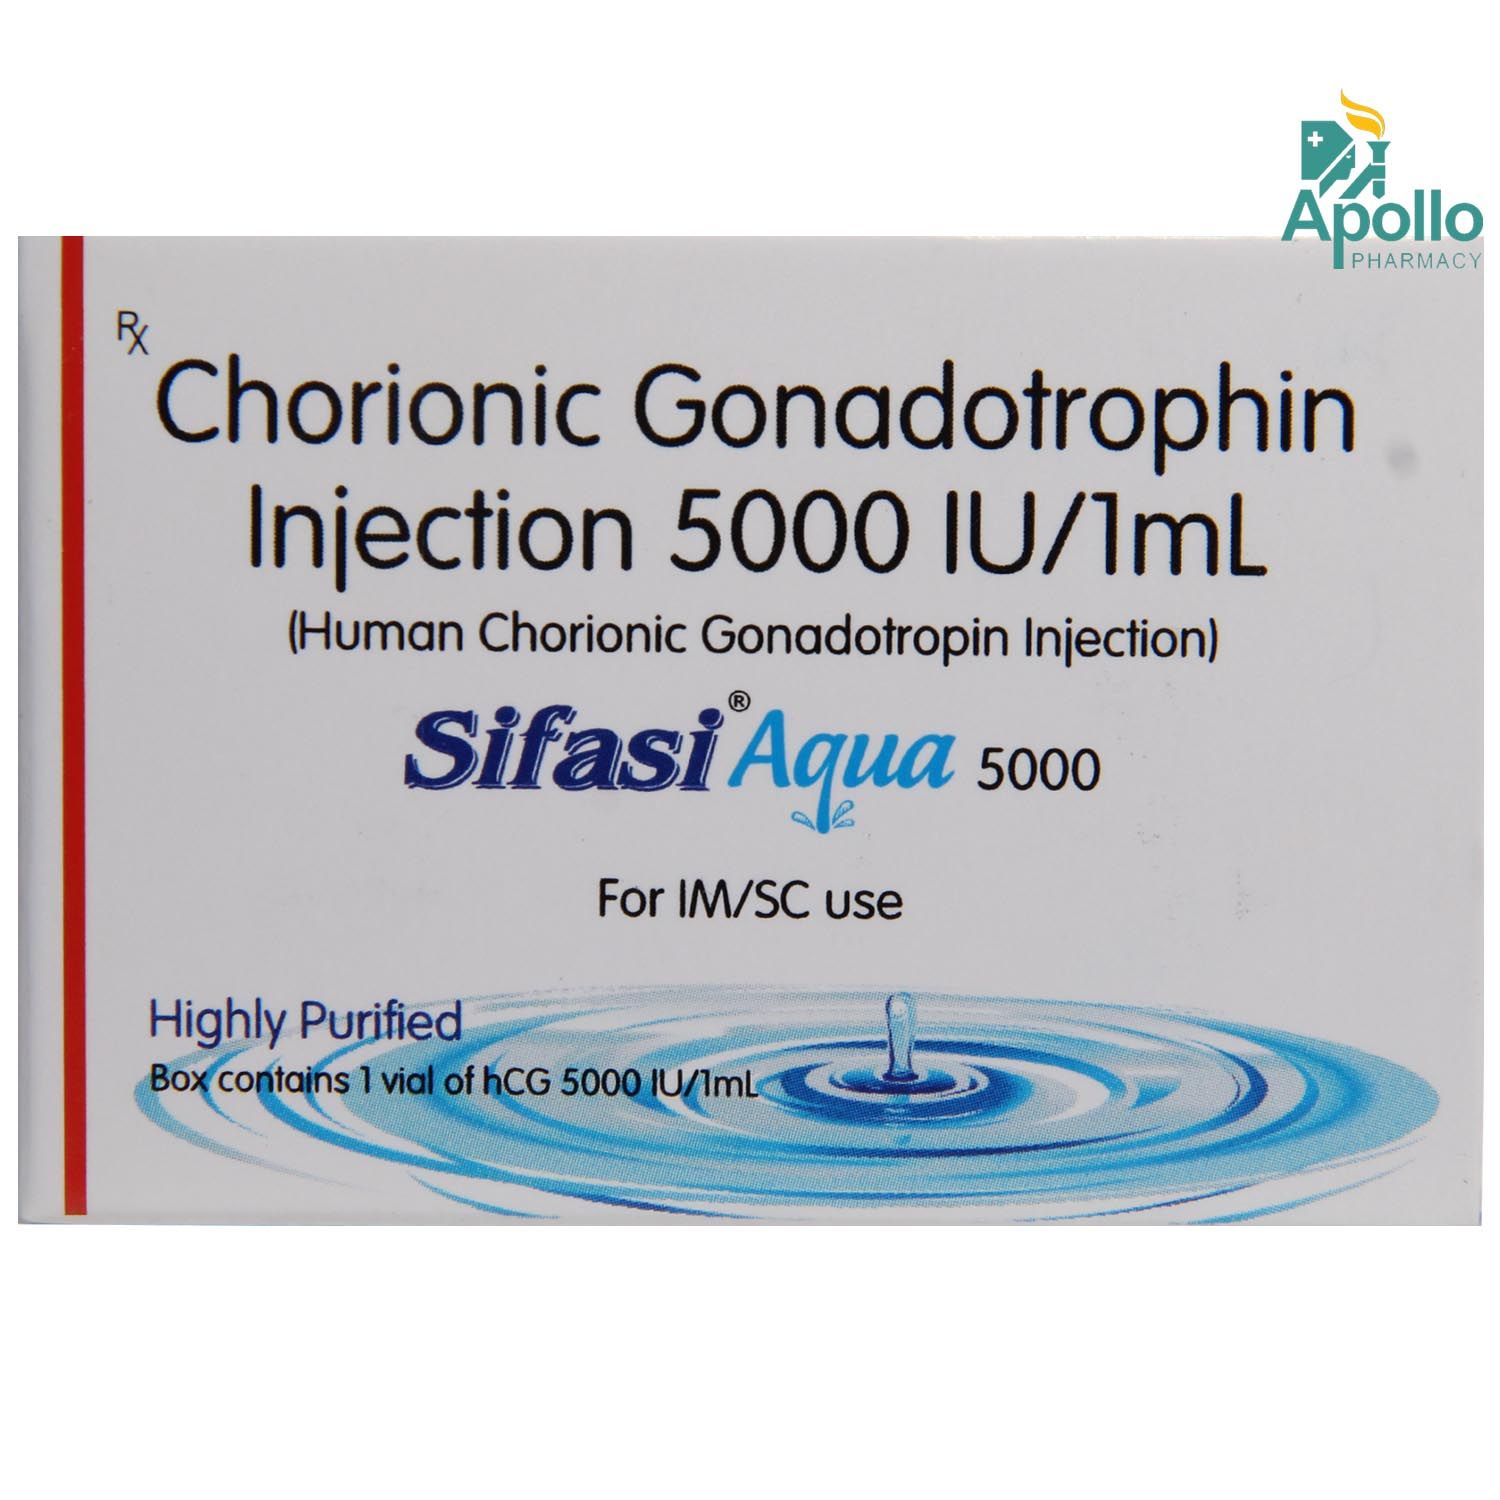 sifasi-aqua-5000-injection-uses-in-tamil-chorionic-gonadotrophin